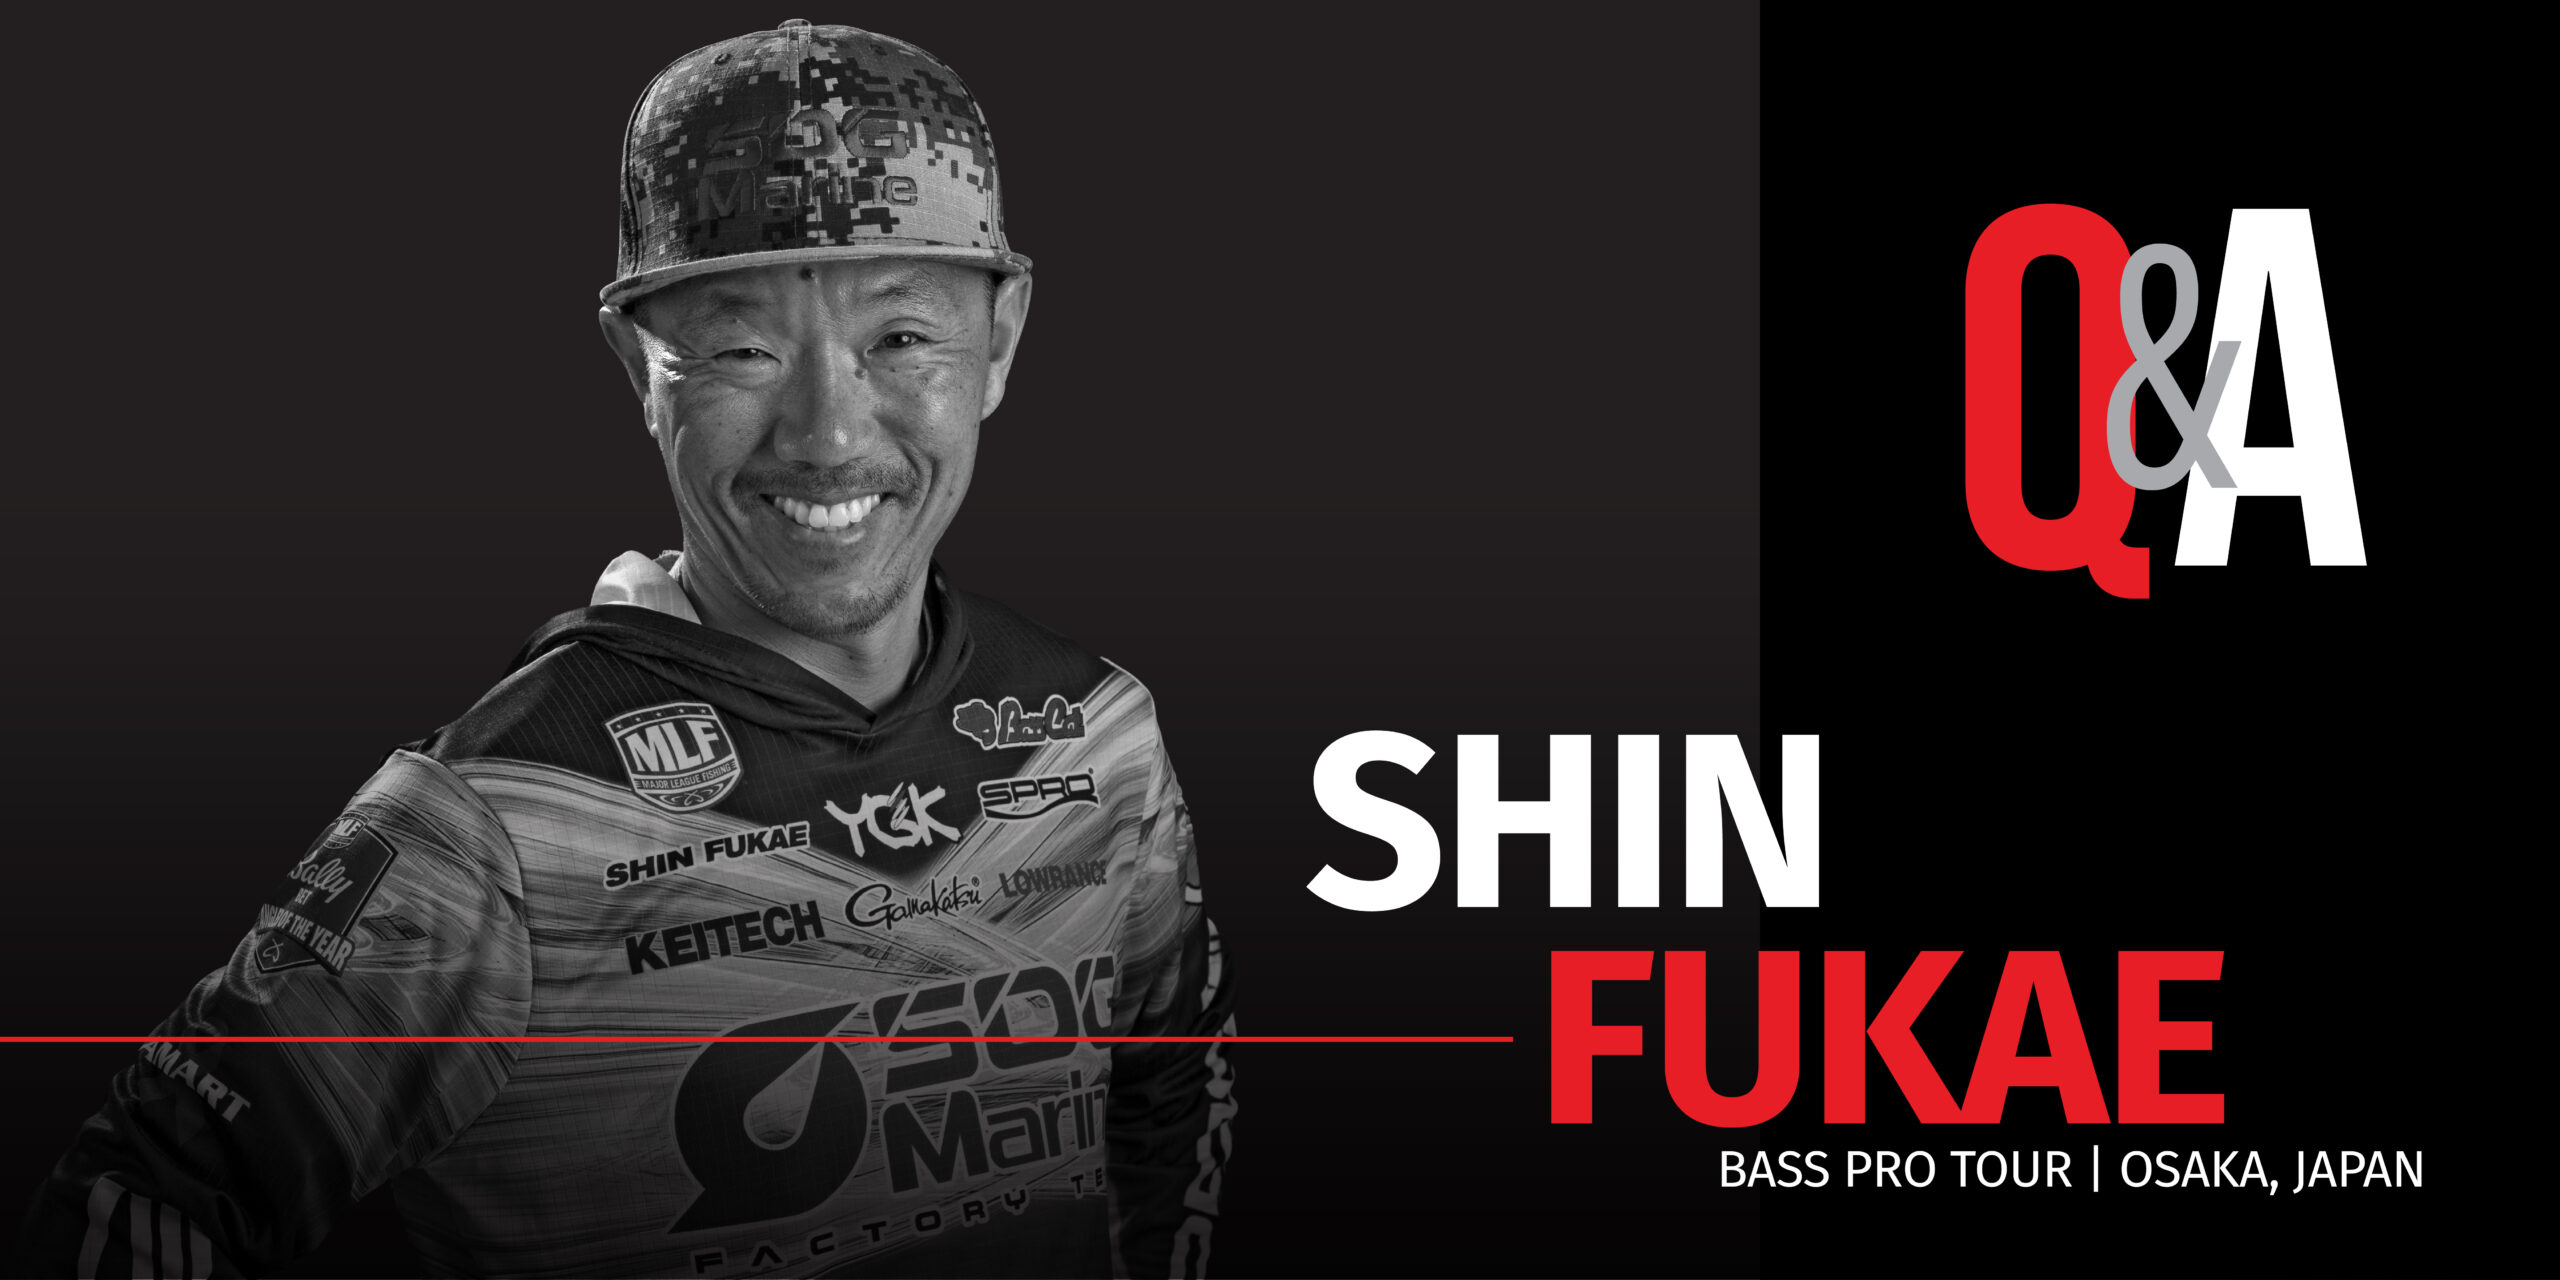 Q&A with Shin Fukae: His bass fishing history, life on the road and family  time in Japan - Major League Fishing